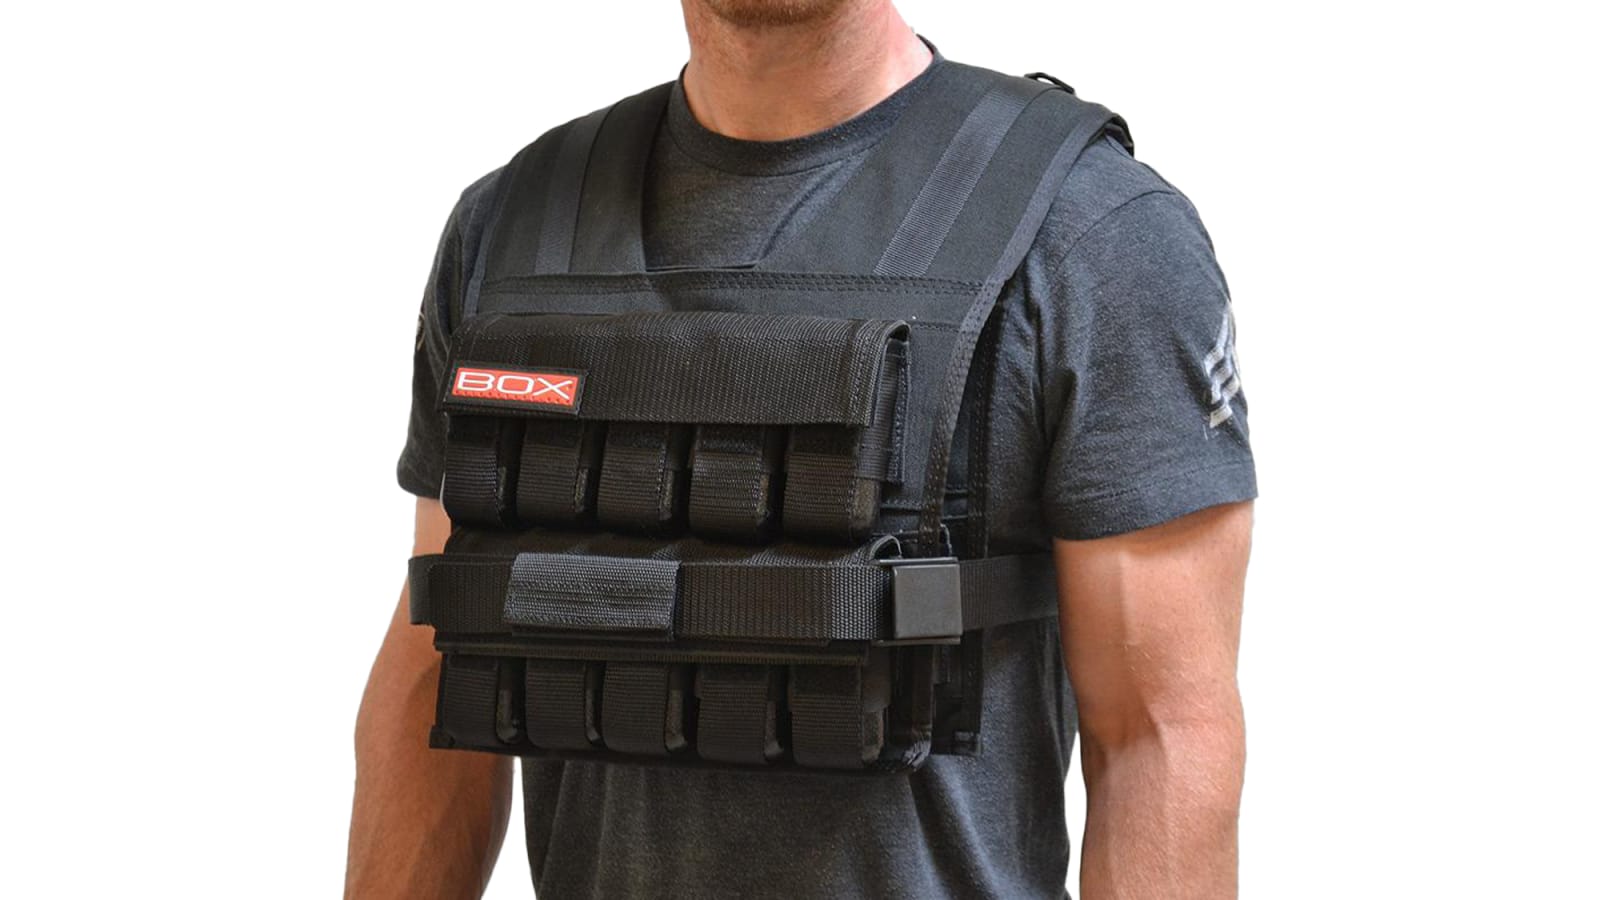 https://assets.roguefitness.com/f_auto,q_auto,c_limit,w_1600,b_rgb:ffffff/catalog/Bodyweight%20and%20Gymnastics/Bodyweight%20/Weighted%20Vests/WV0002/WV0002-H_oswcmm.png